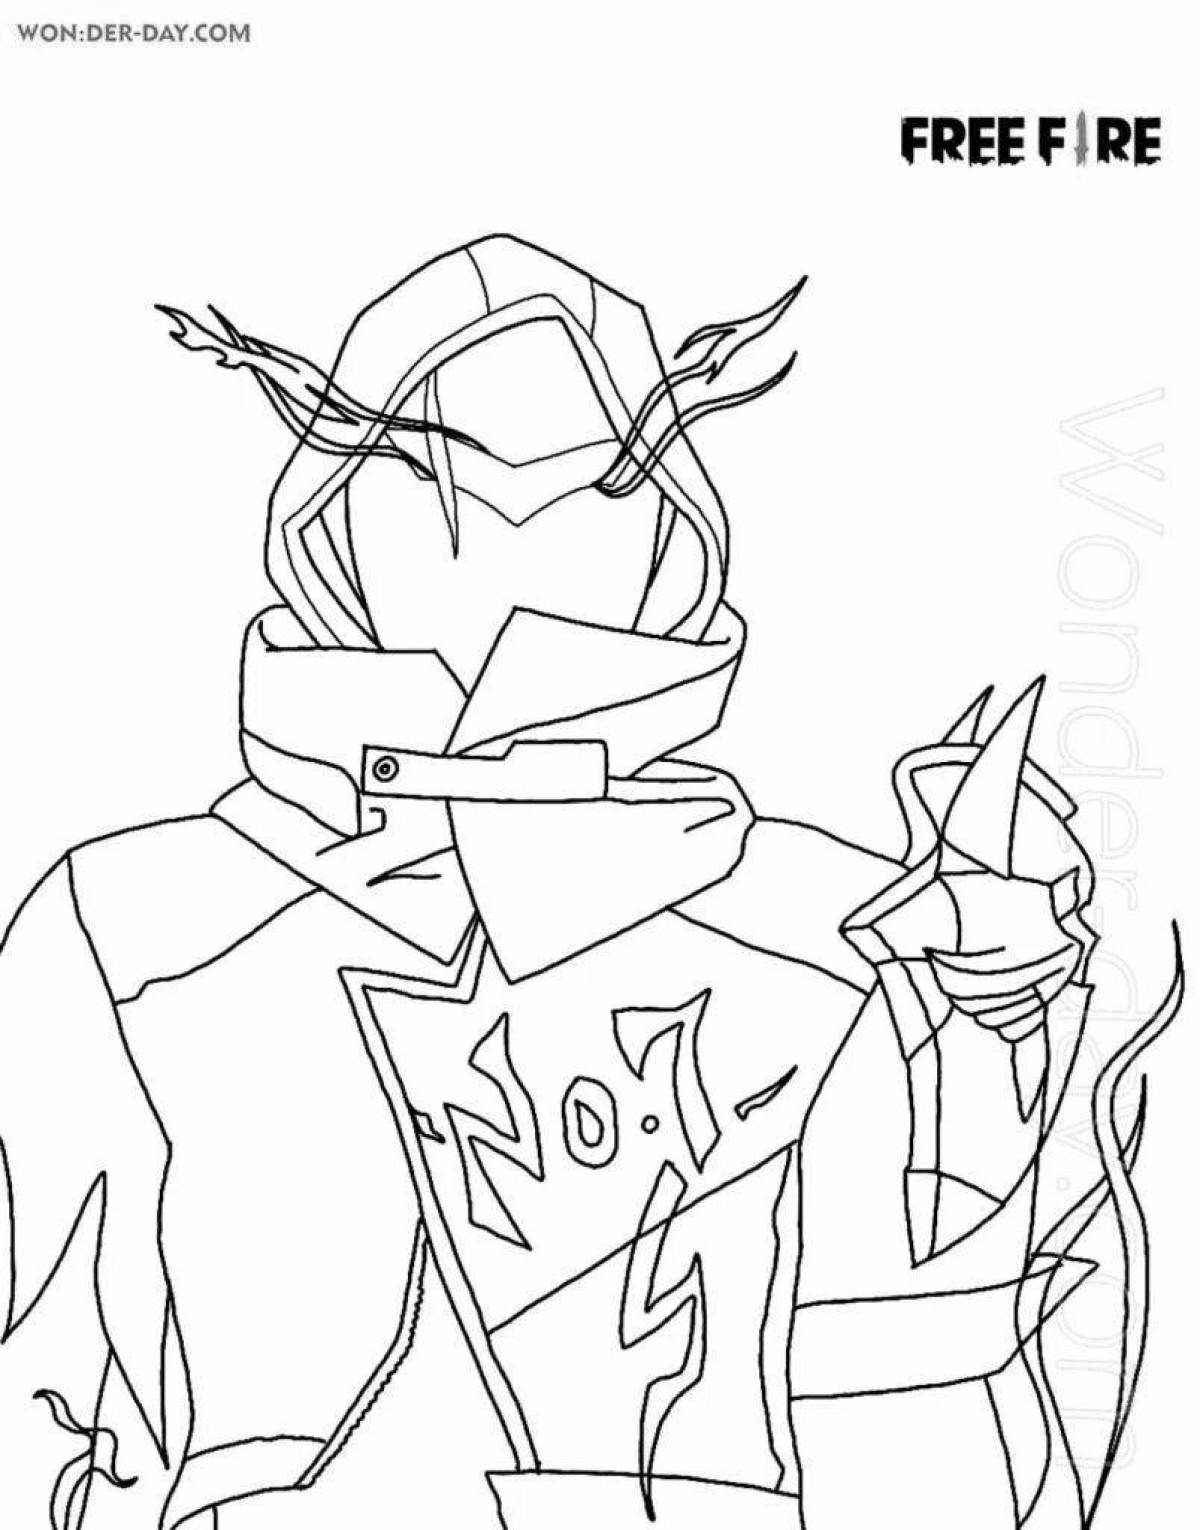 Luminous pro free fire weapon coloring page